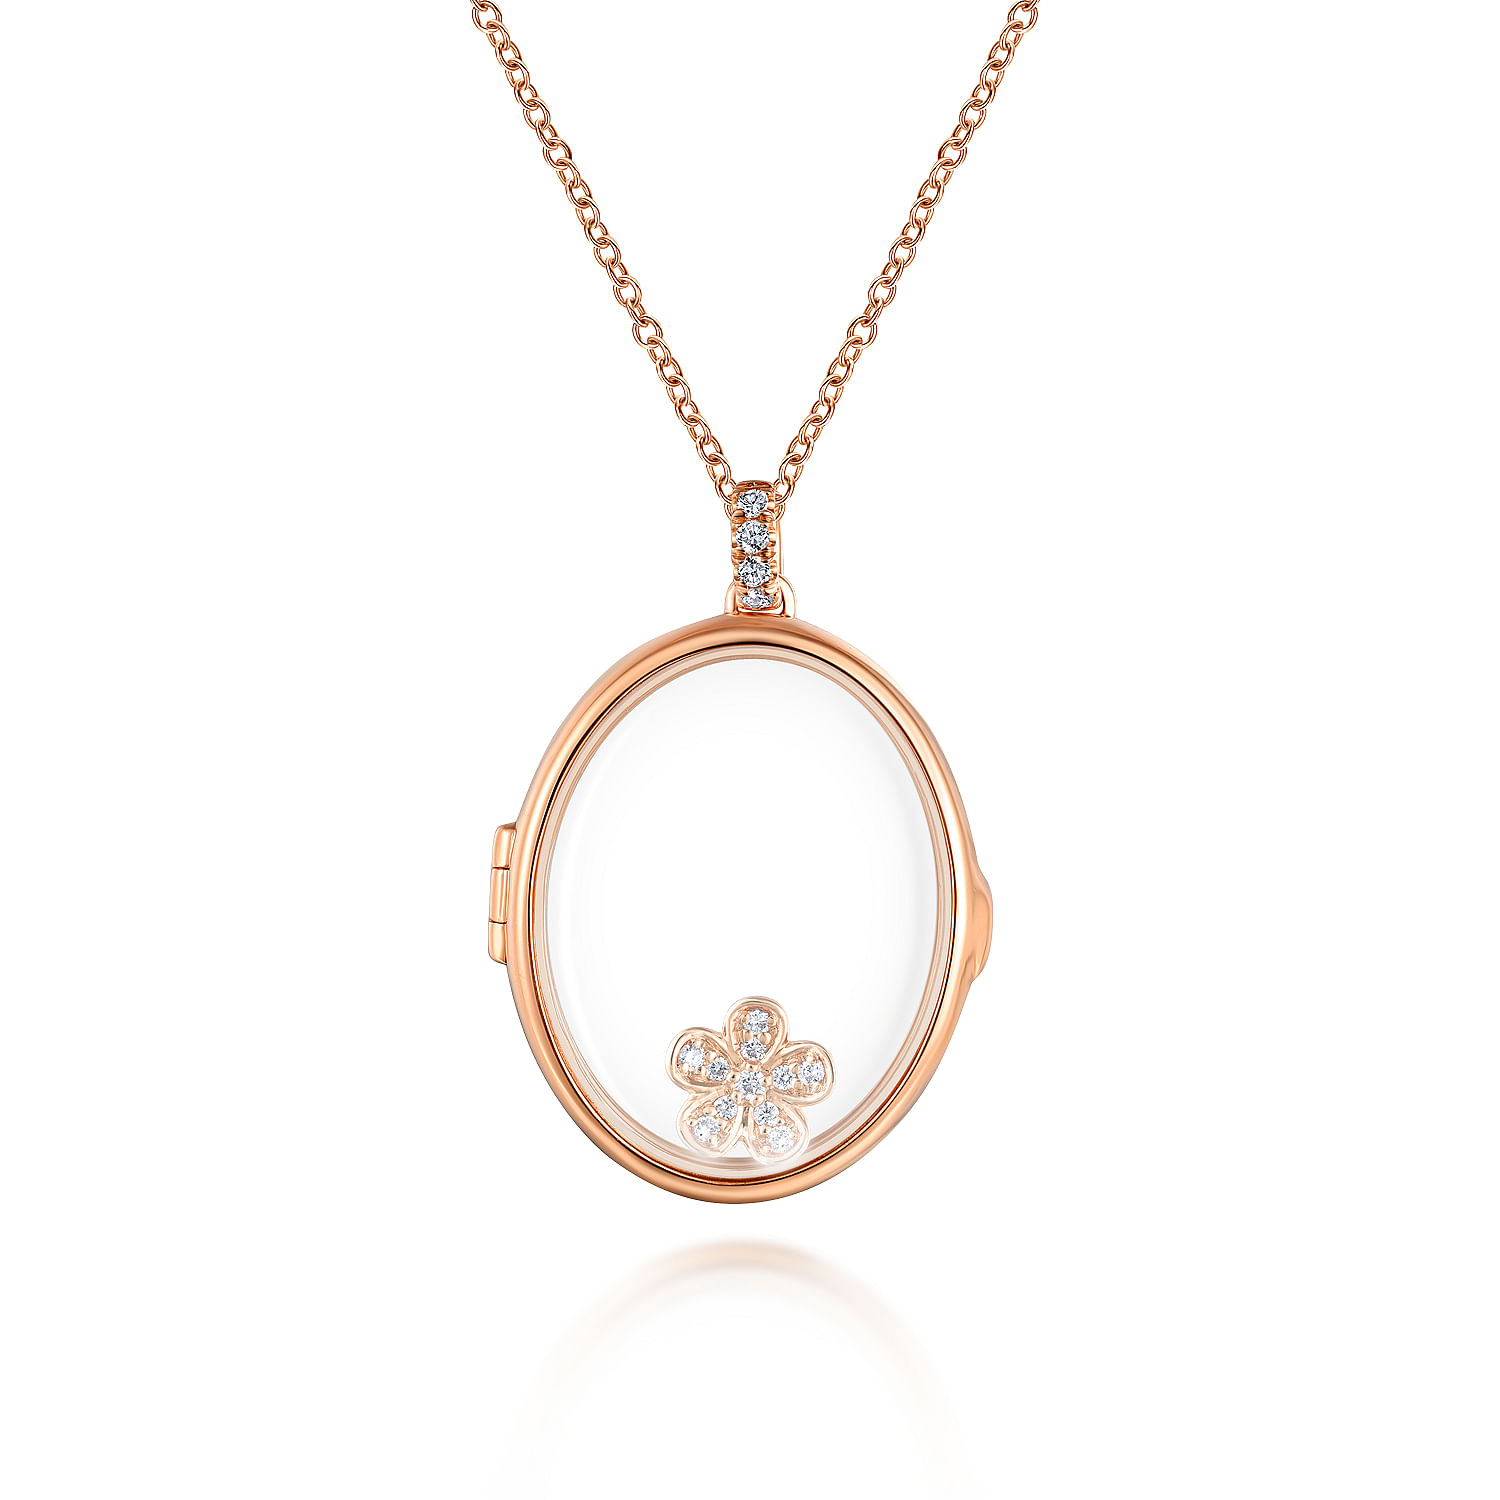 25 inch 14K Rose Gold Oval Glass Front Locket Necklace